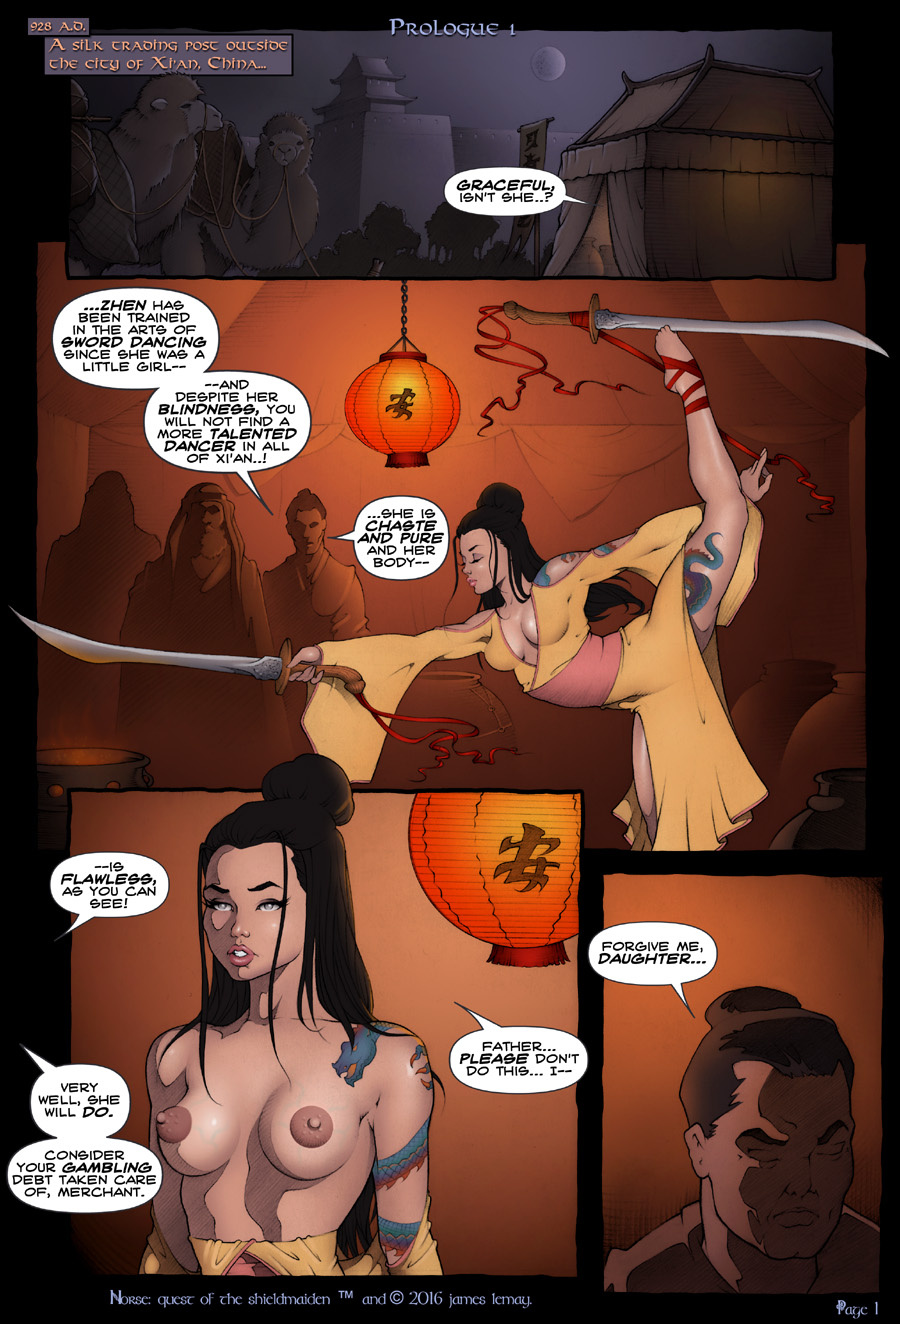 Norse - Quest of the Shield Maiden porn comics Oral sex, Anal Sex, Bestiality, Big Tits, Group Sex, Lesbians, Stockings, Titfuck